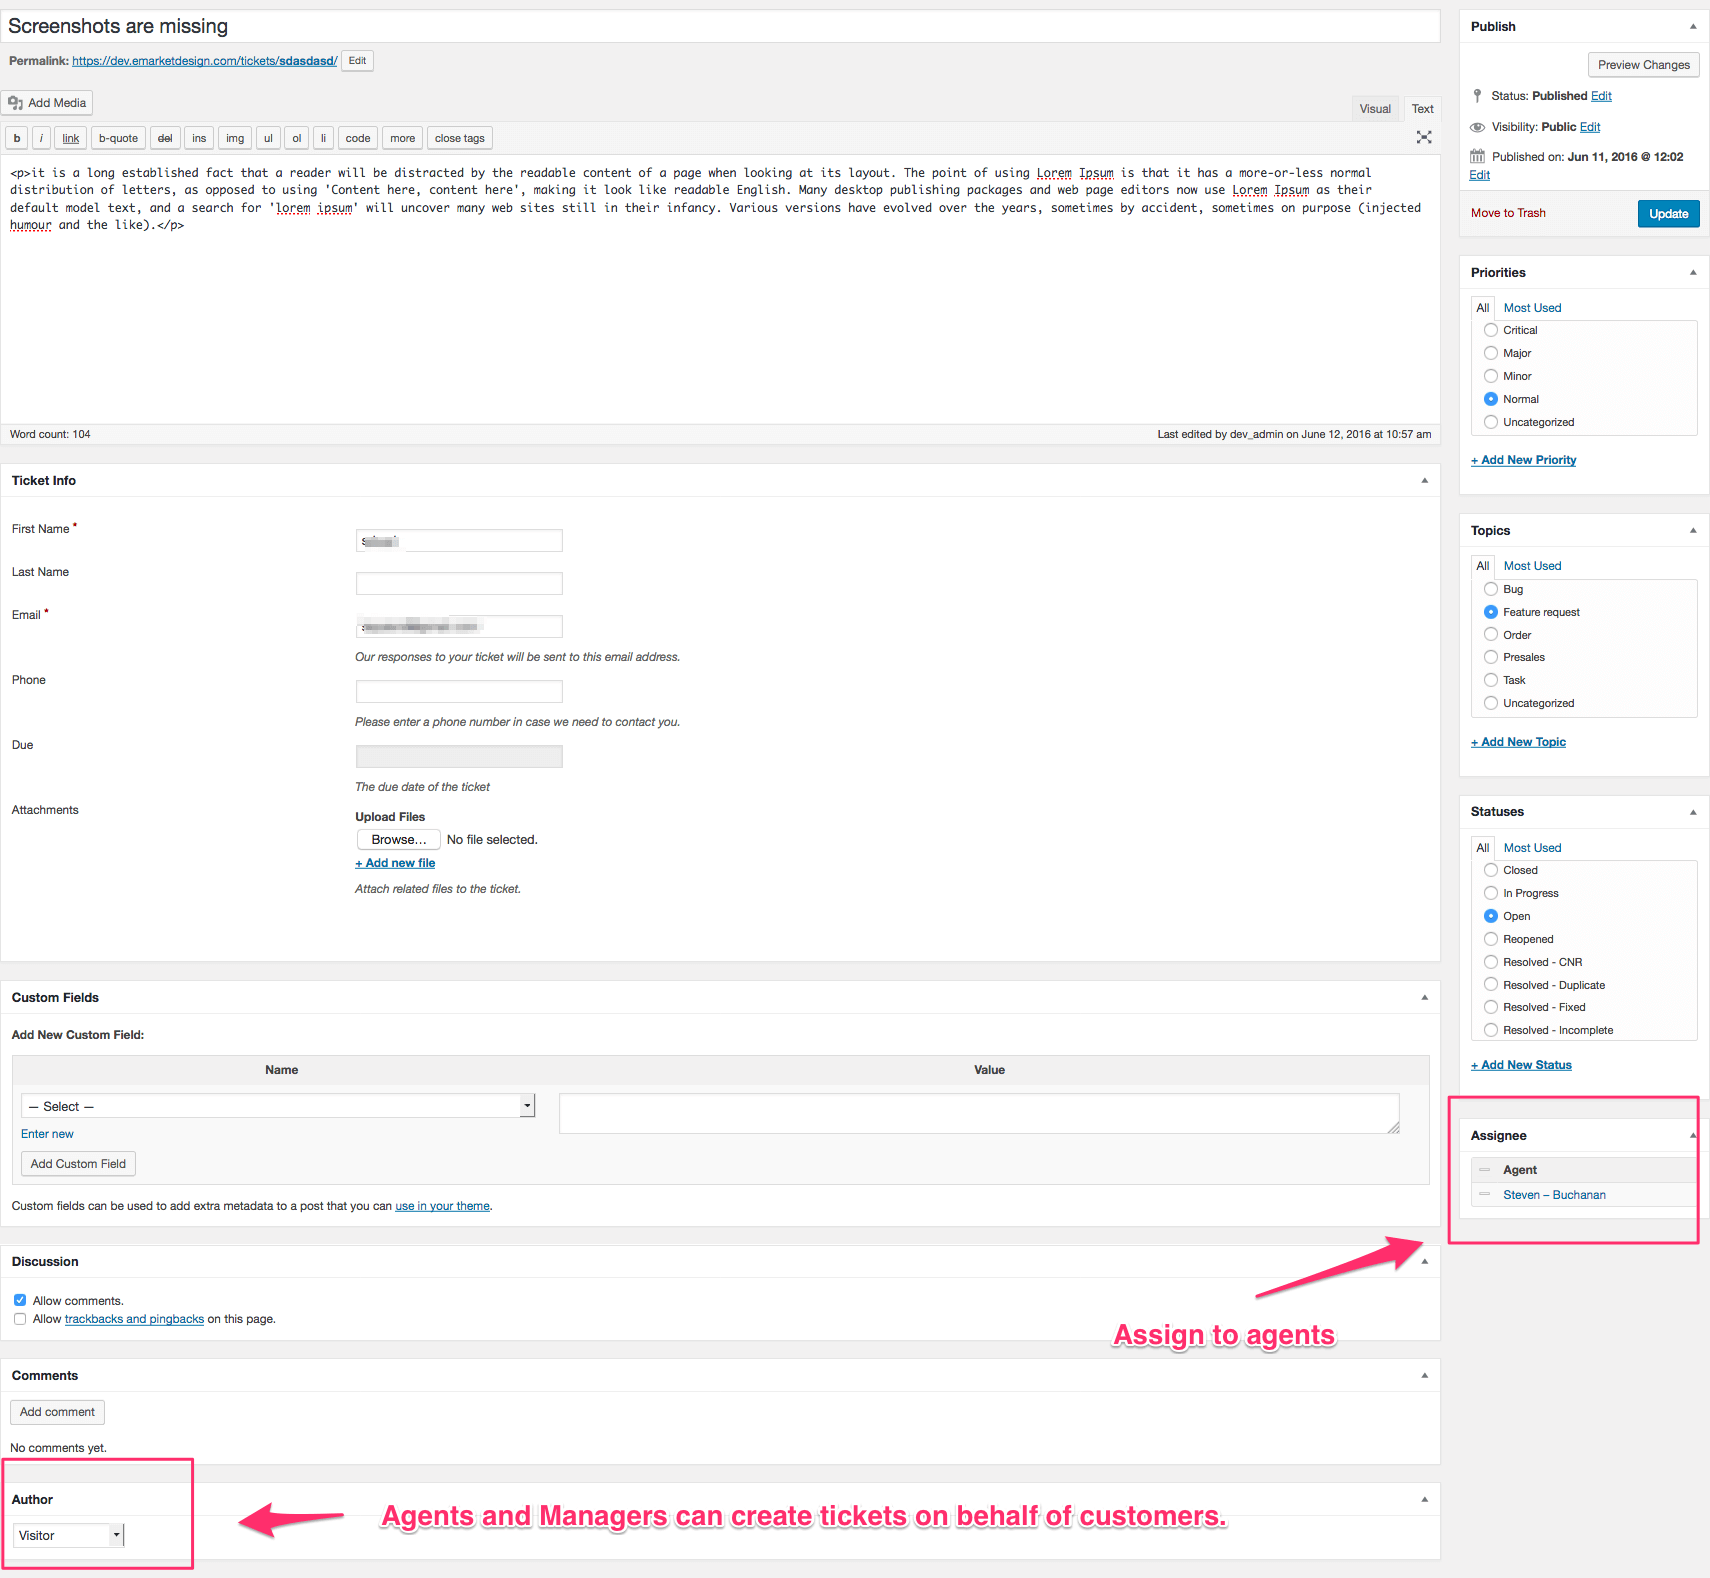 Most comprehensive [WooCommerce Integration](https://emdplugins.com/plugin-features/wp-ticket-woocommerce-addon) to this date